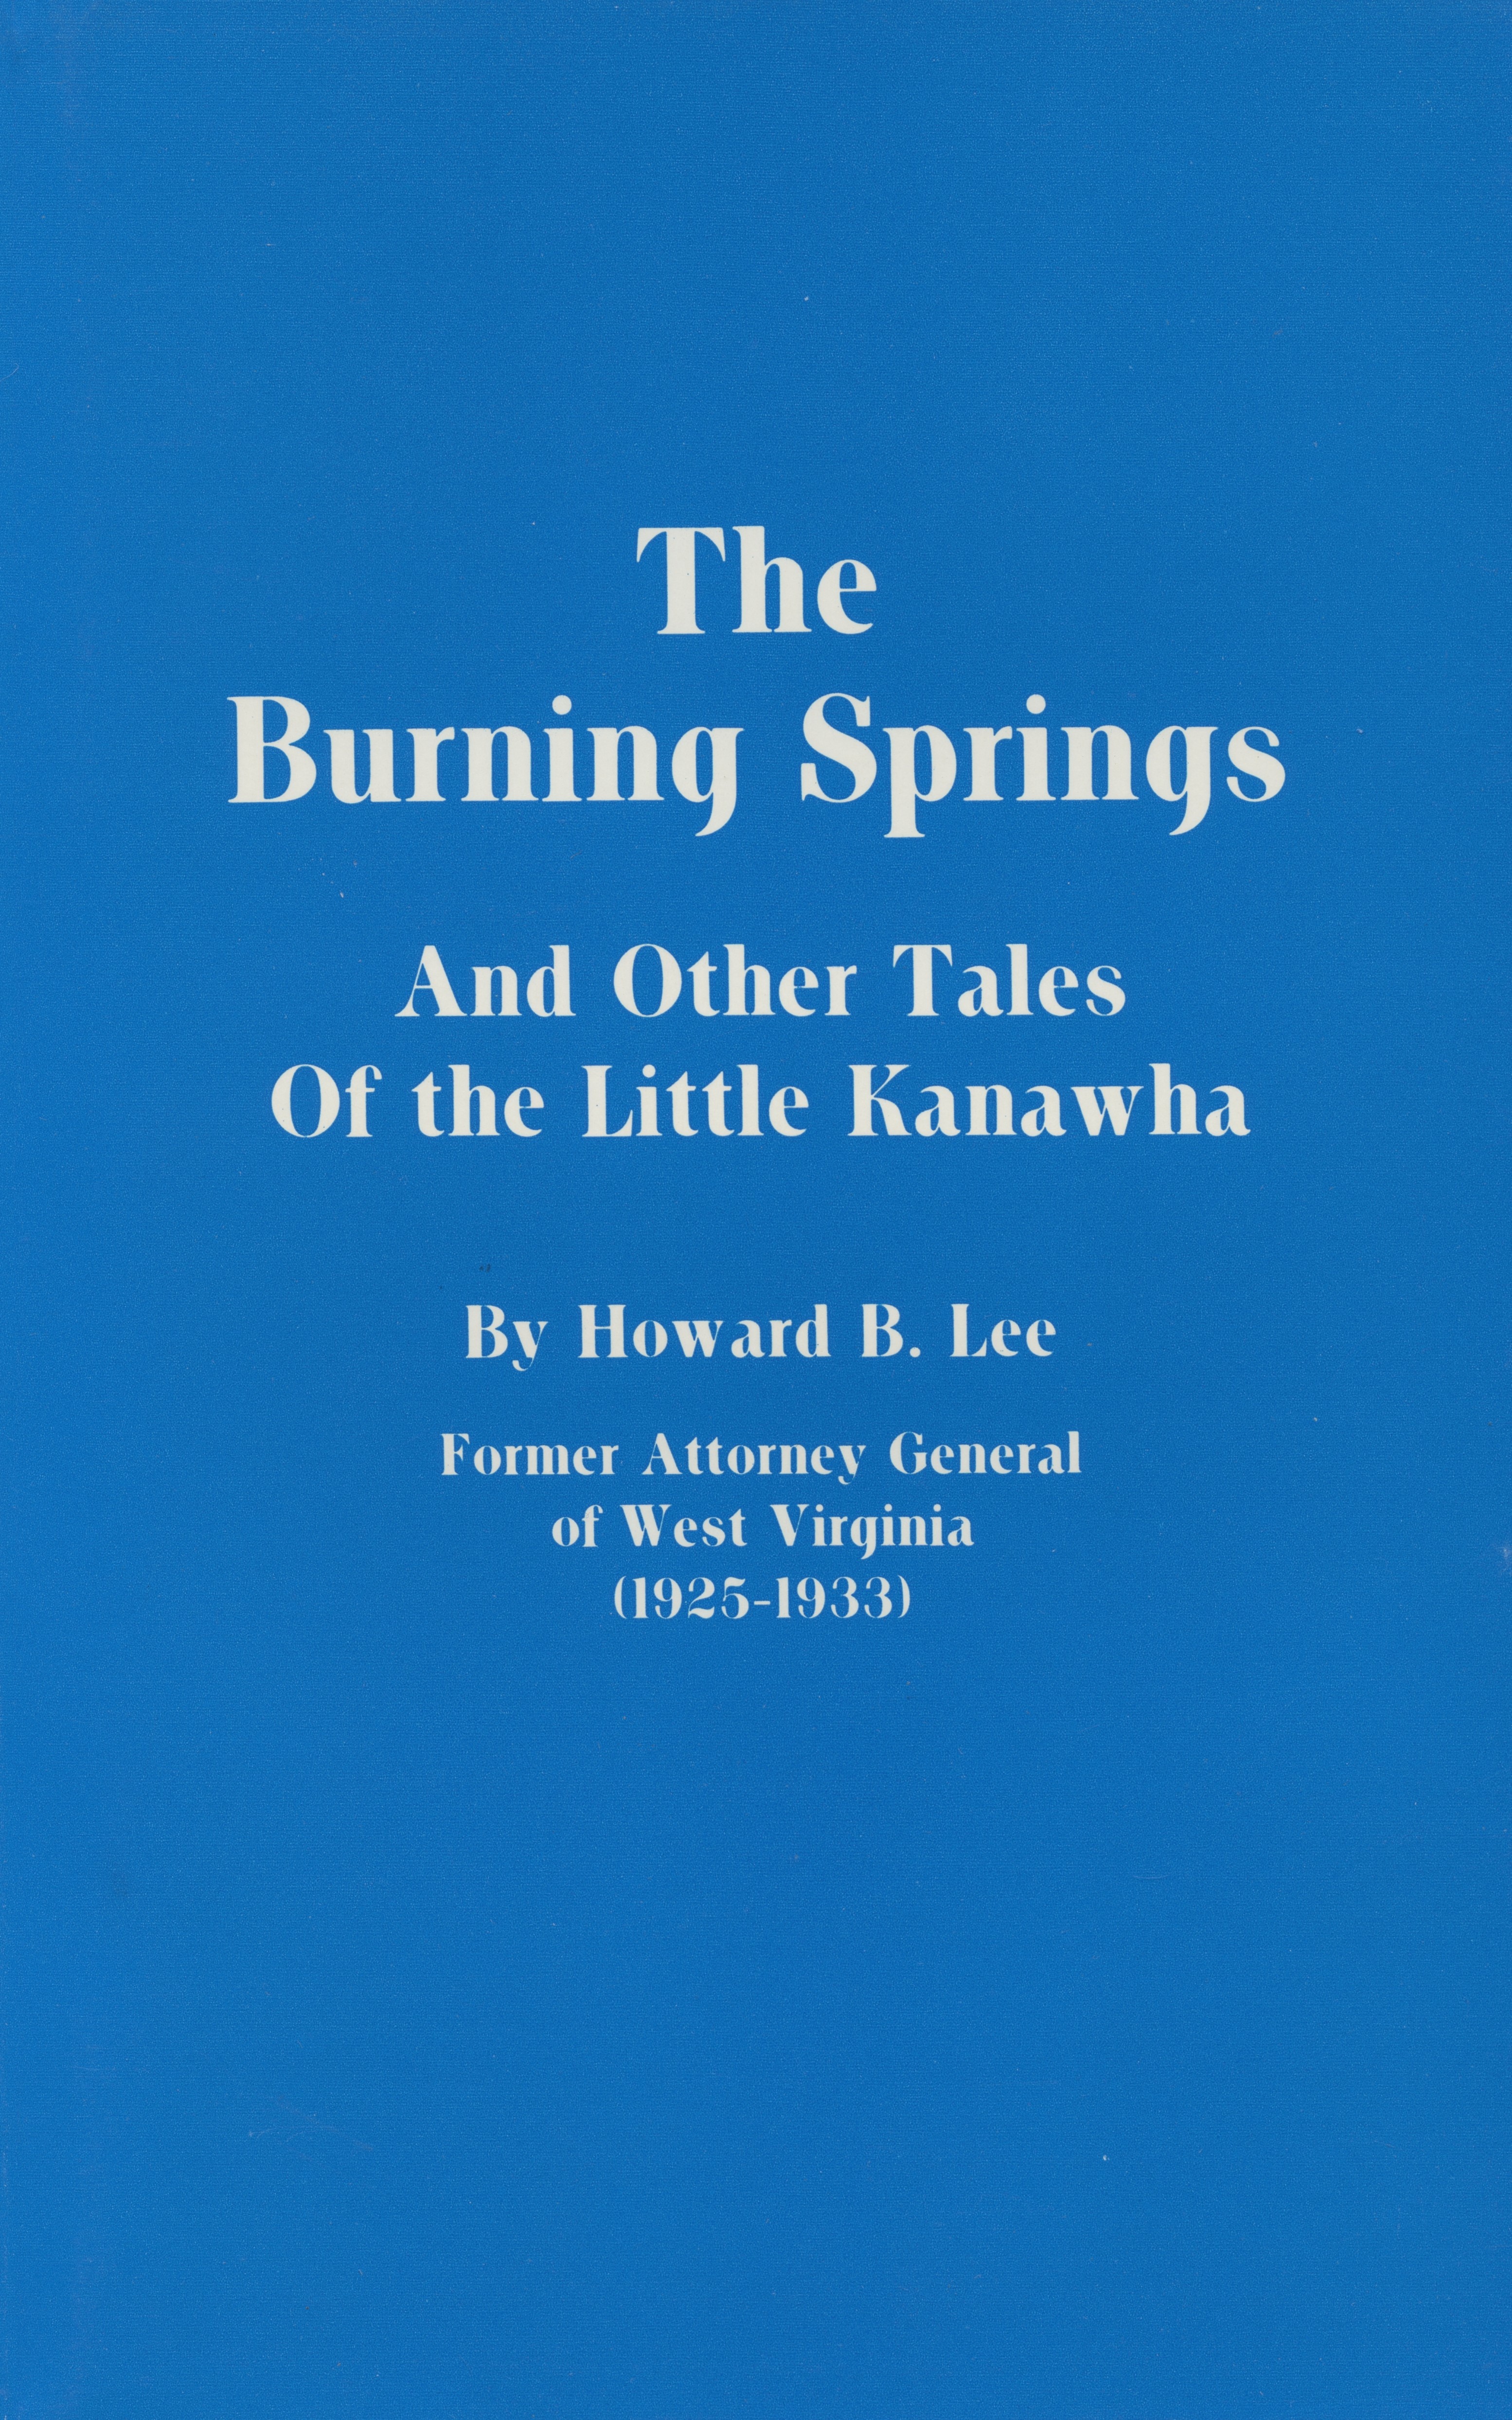 The Burning Springs and Other Tales of the Little Kanawha